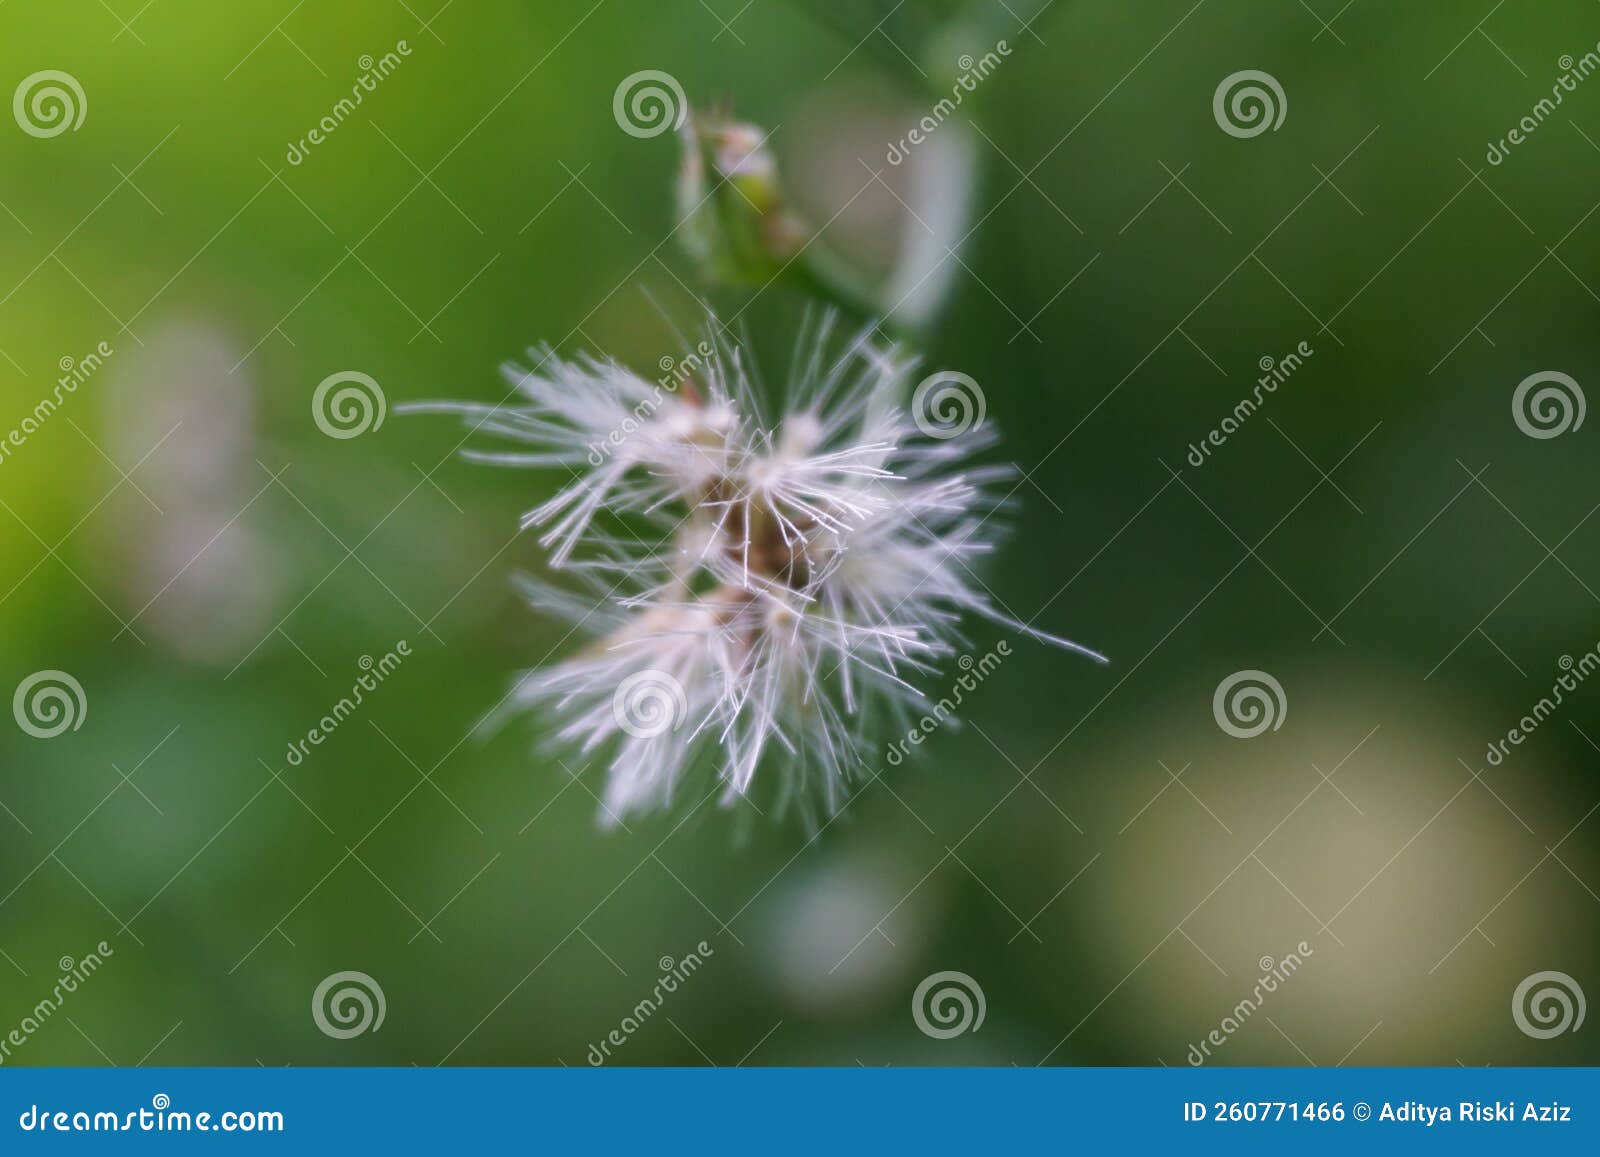 259 Cinereum Flower Stock Photos - Free & Royalty-Free Stock Photos from  Dreamstime